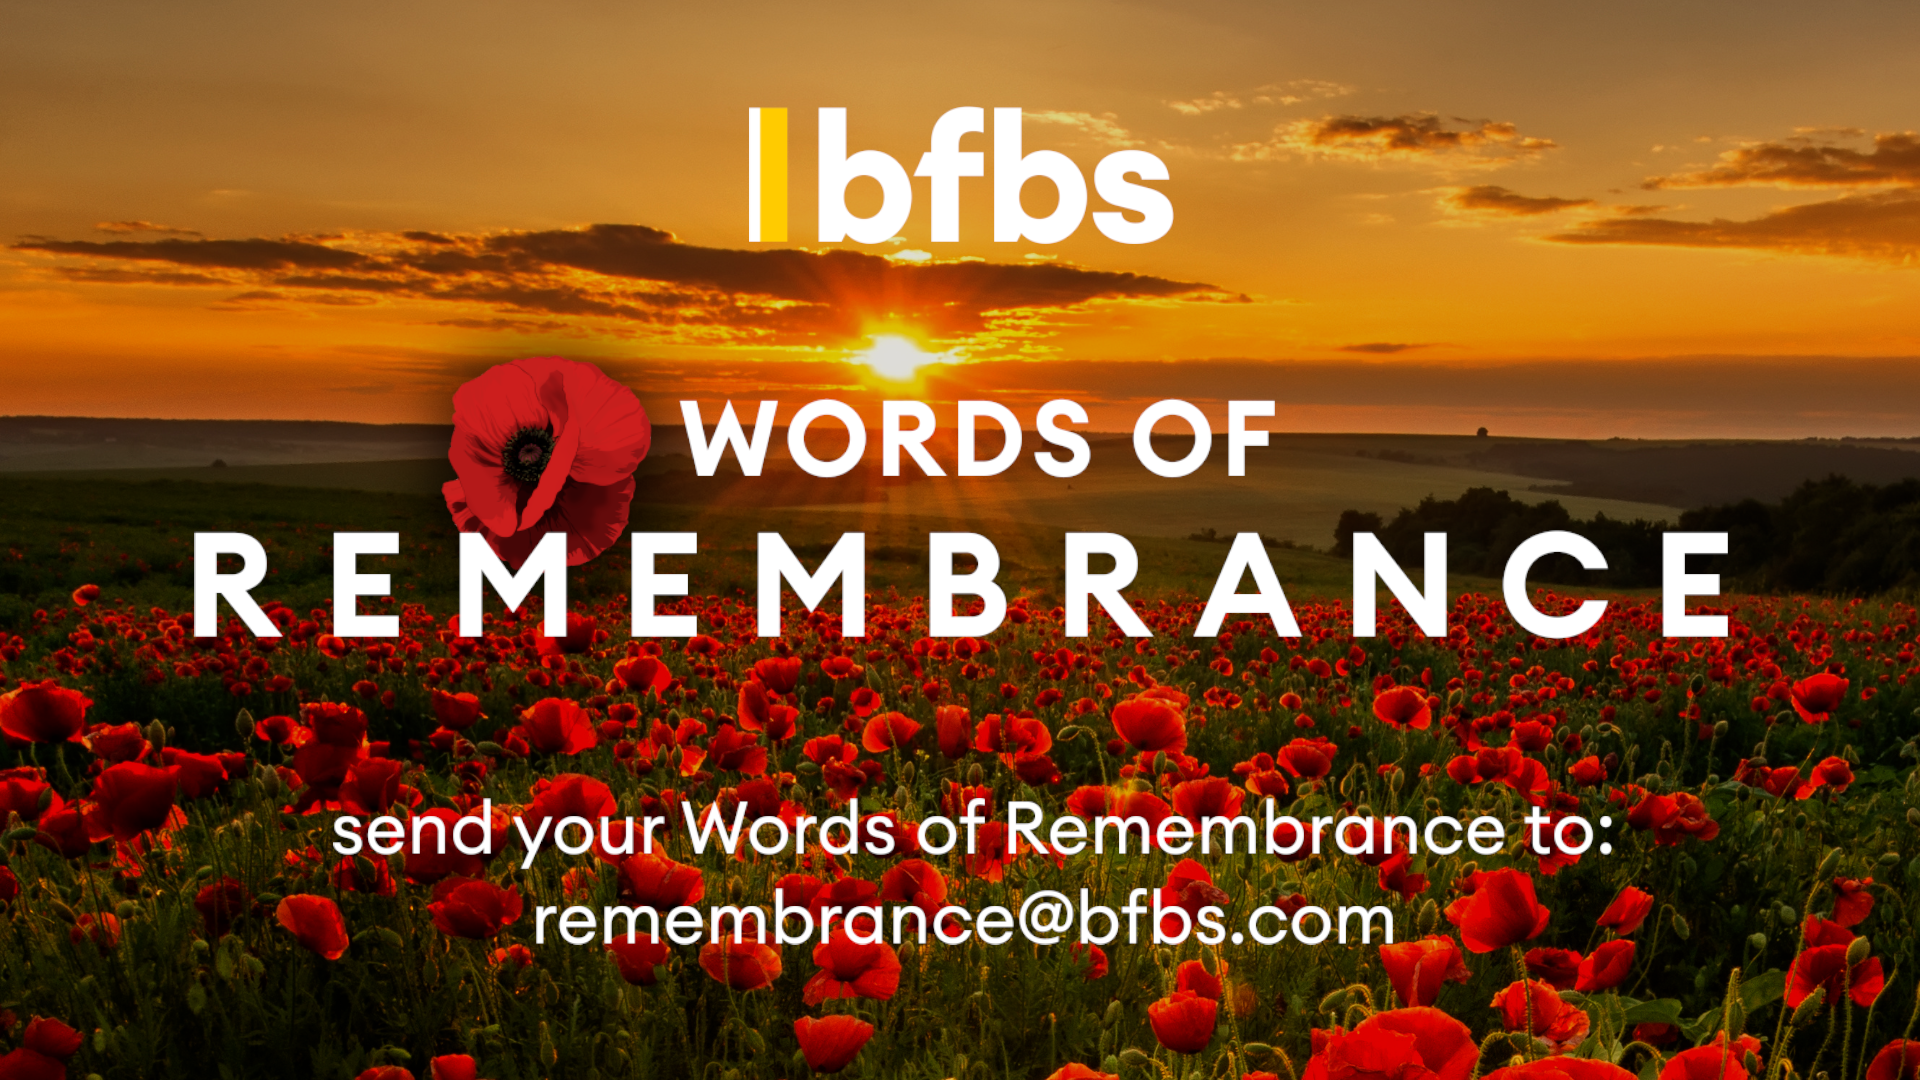 BFBS Launches Digital Map Of Conflicts To Mark Remembrance Day